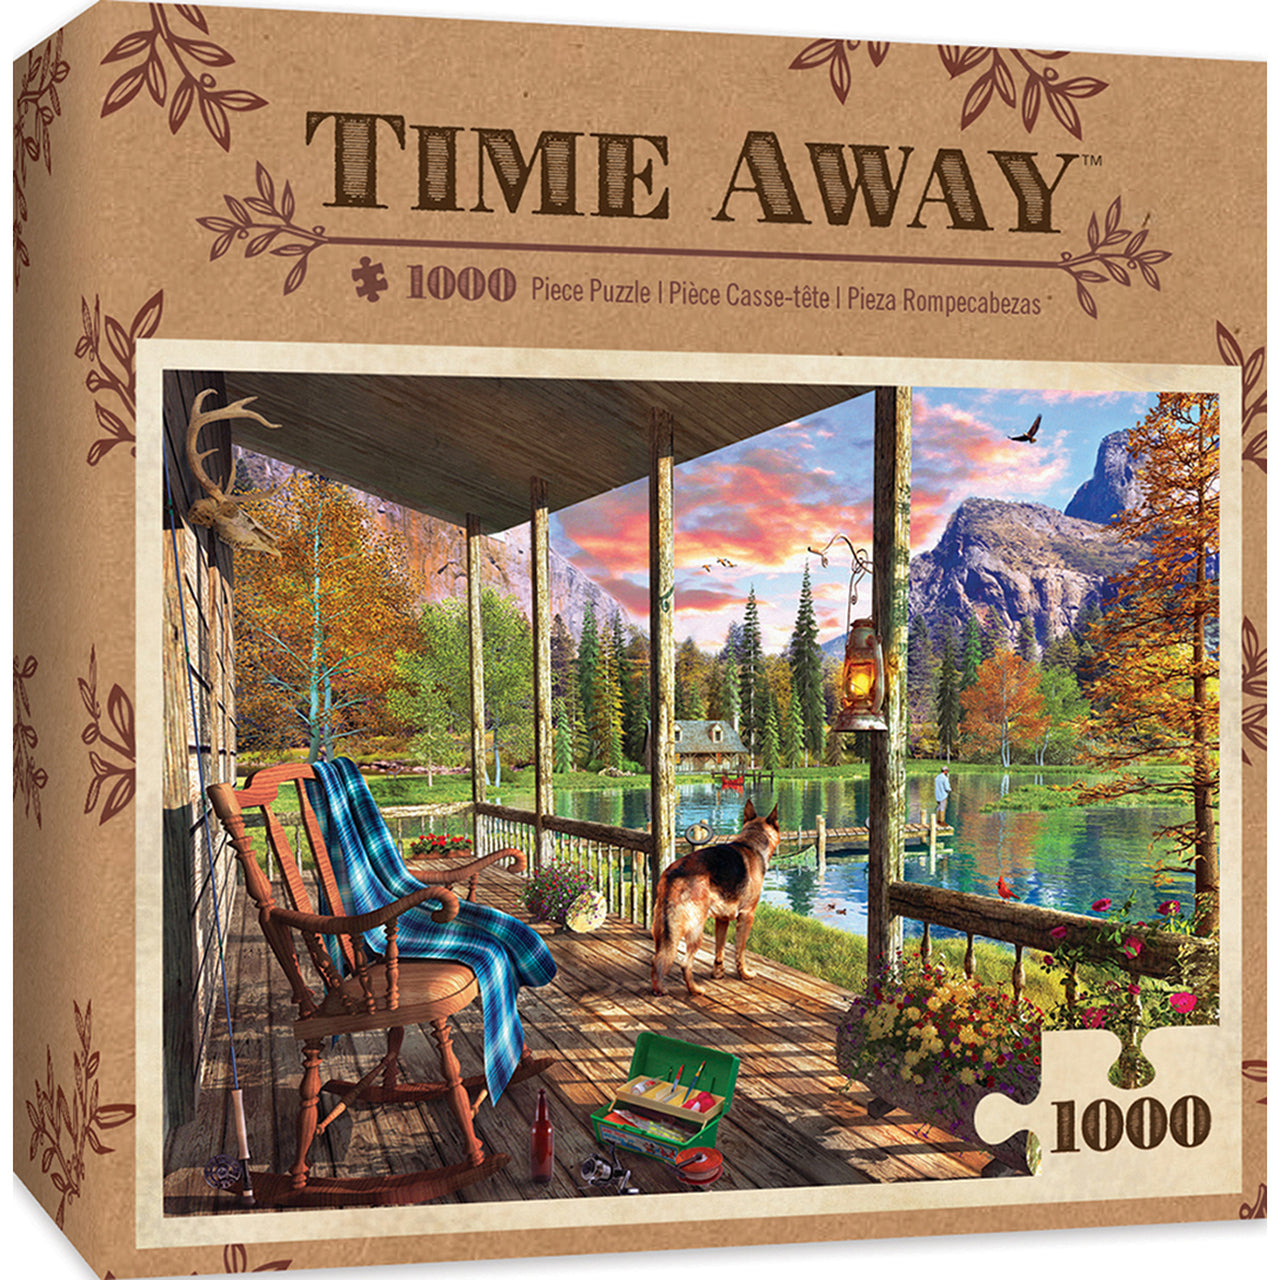 Time Away Sunset Ritual 1000 Piece Jigsaw Puzzle by Masterpieces